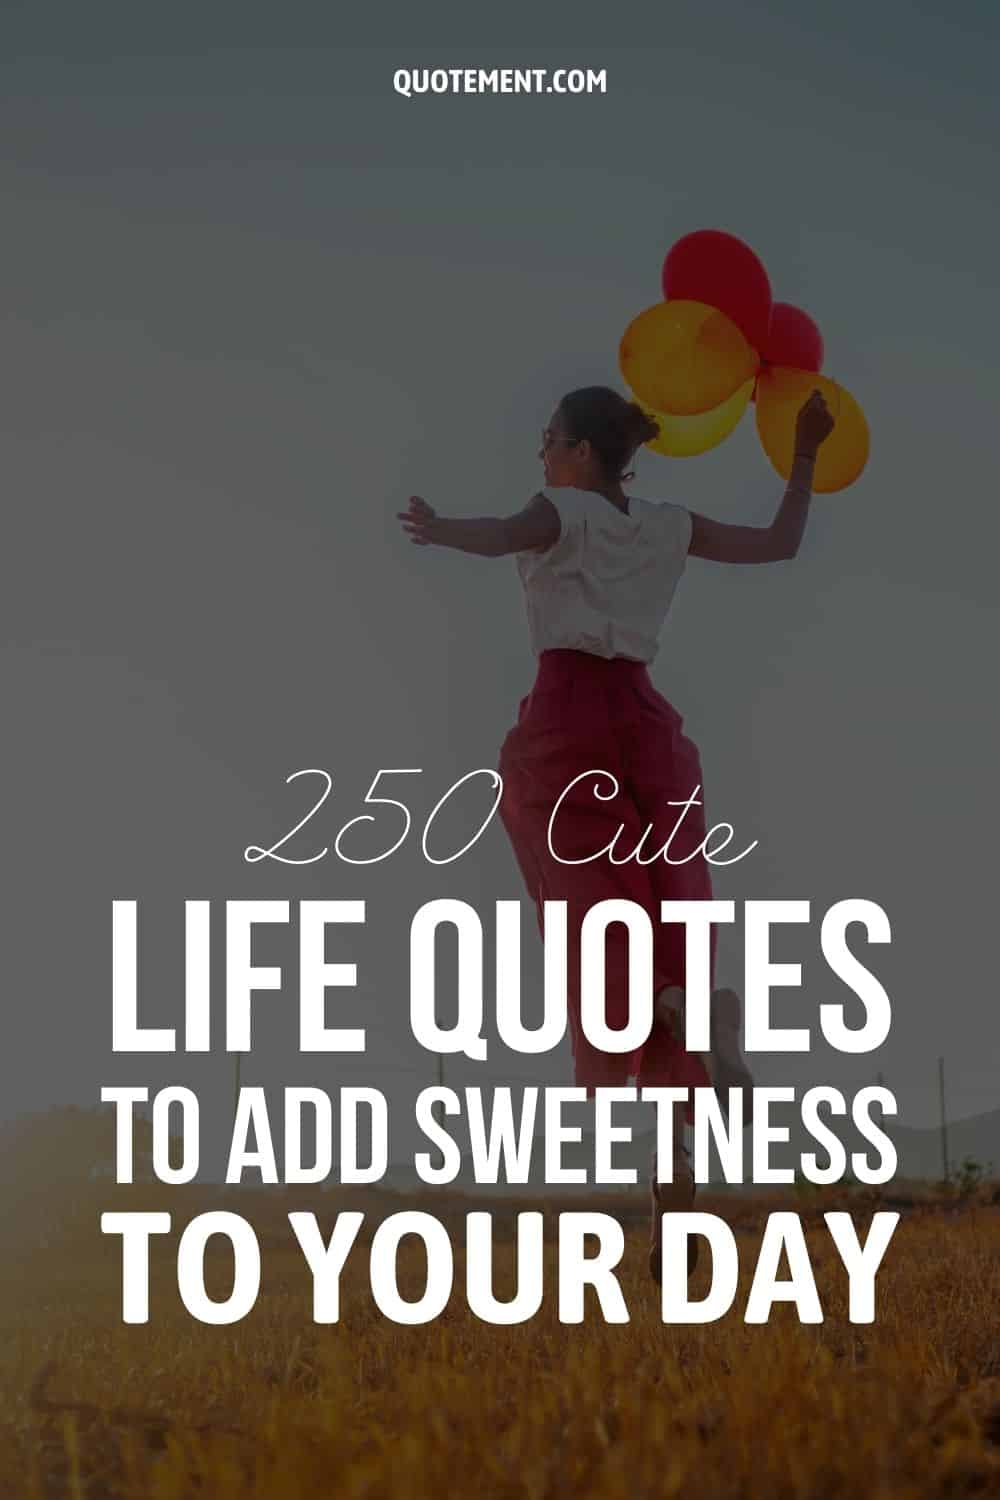 250 Cute Life Quotes To Add Sweetness To Your Day
